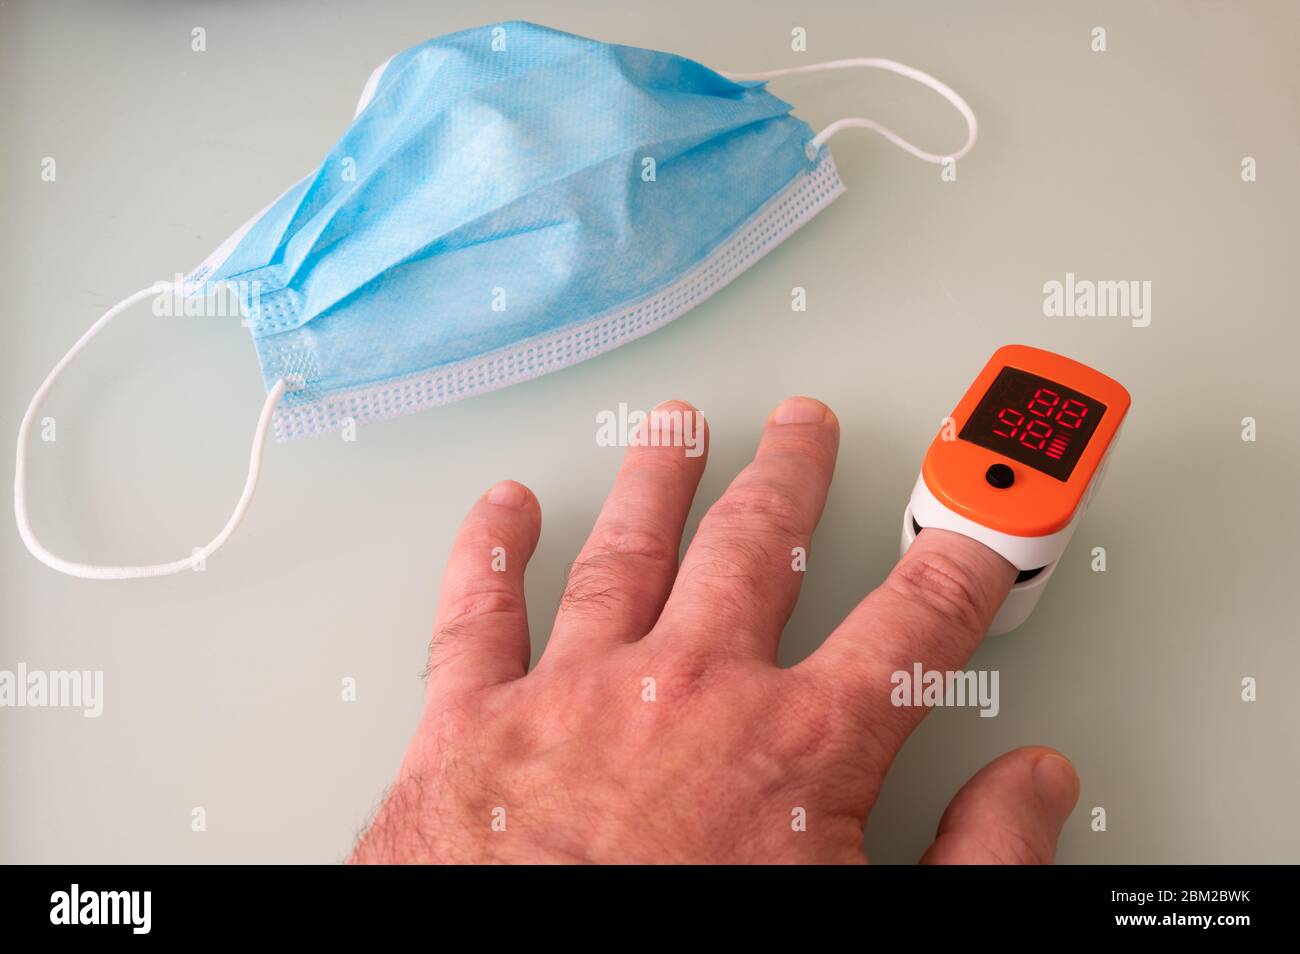 Pulse oximeter digital portable device for monitoring blood oxygen saturation and heart rate. Medical equipment for health examination. Coronavirus sy Stock Photo